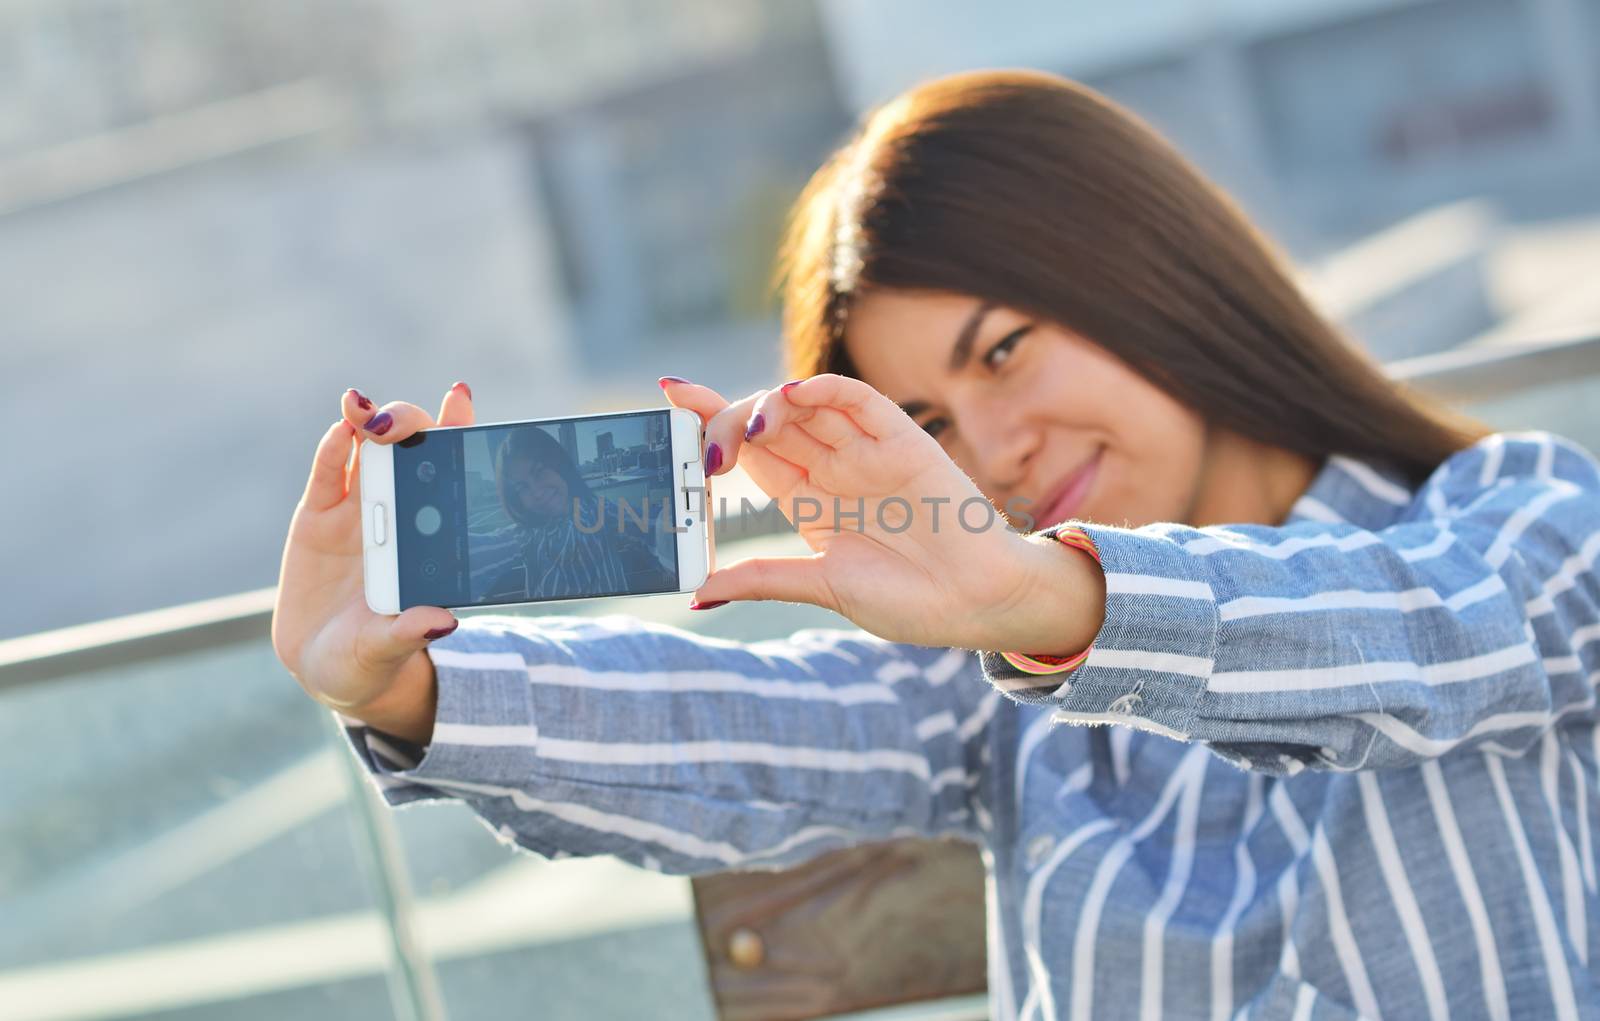 A young girl photographs herself with a phone, walking around the city